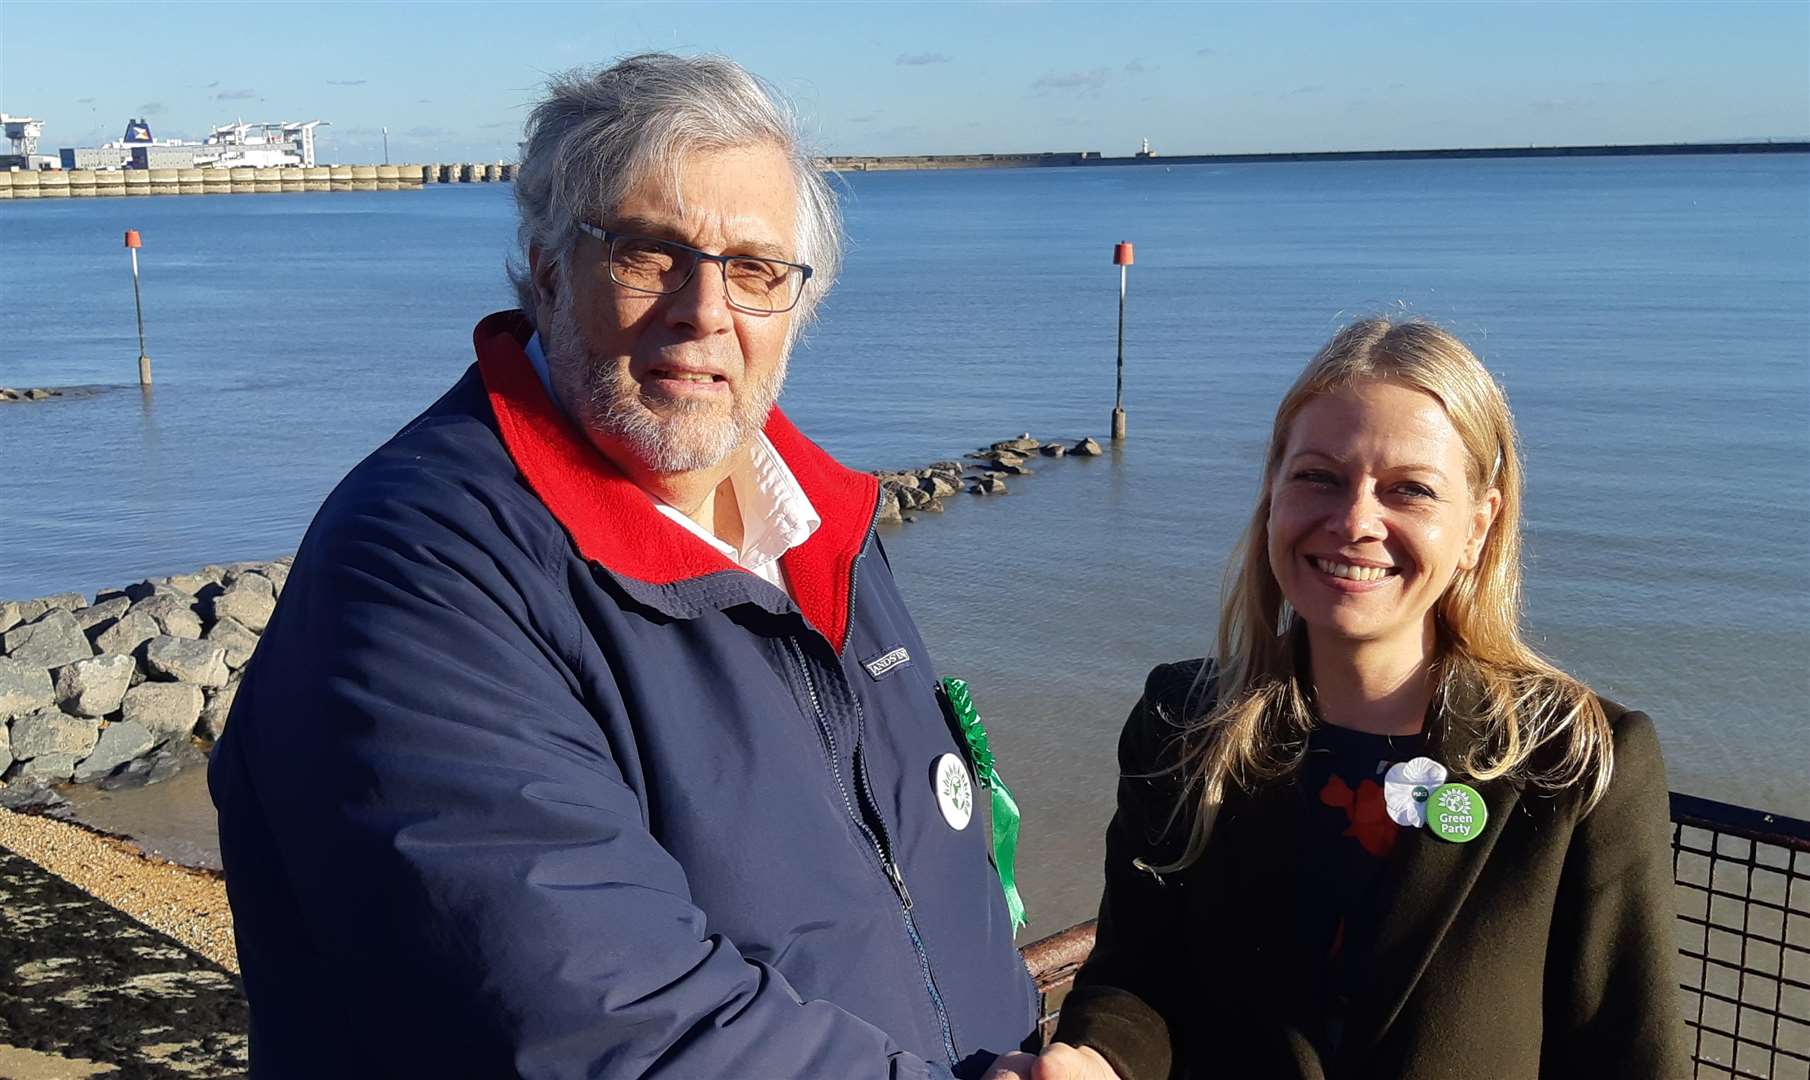 Green co-leader Sian Berry greets Cllr Eddy as a new member today